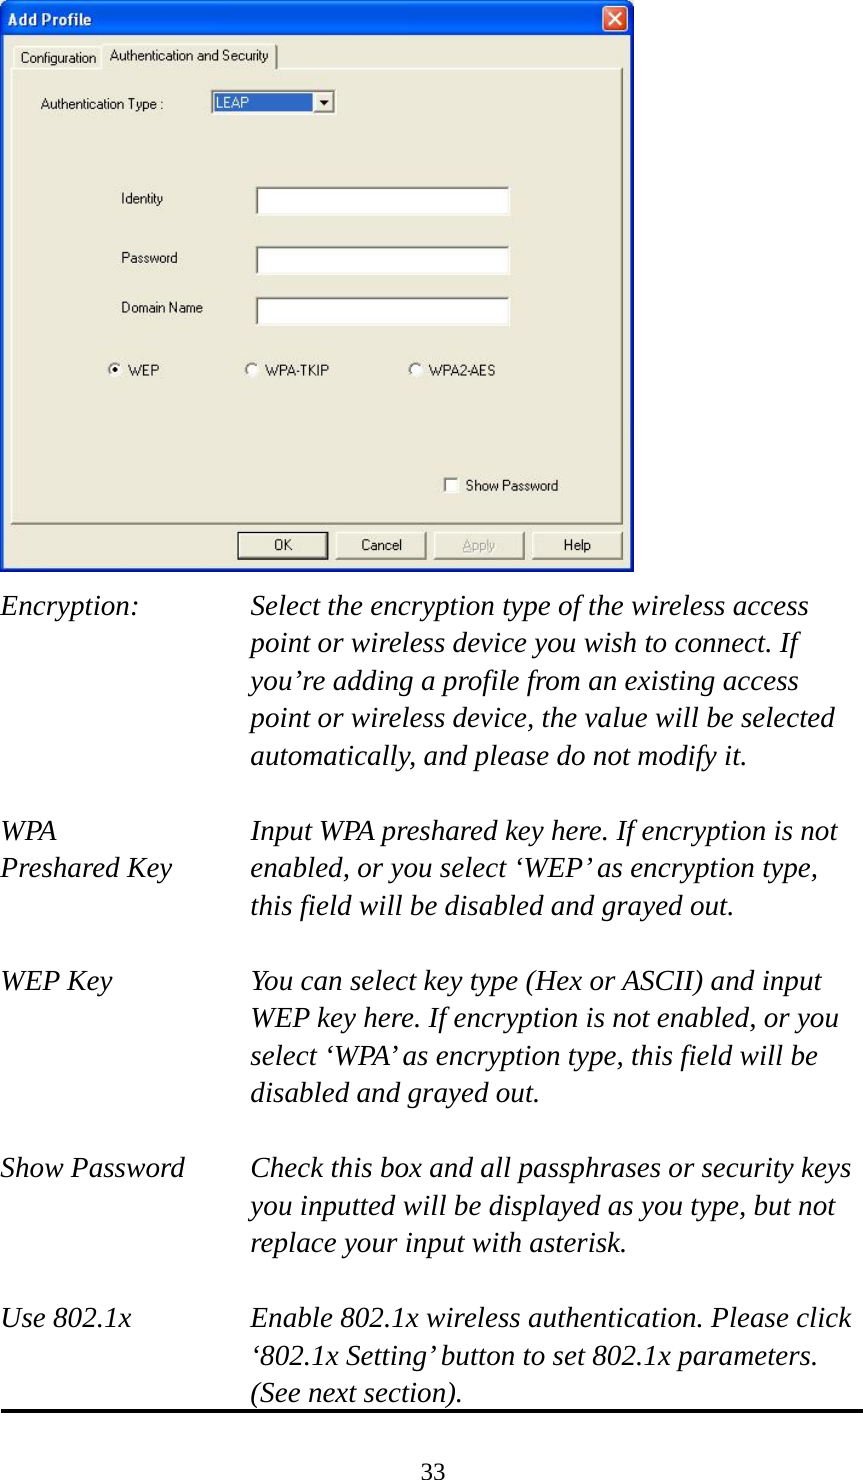  33 Encryption: Select the encryption type of the wireless access point or wireless device you wish to connect. If you’re adding a profile from an existing access point or wireless device, the value will be selected automatically, and please do not modify it.  WPA    Input WPA preshared key here. If encryption is not Preshared Key  enabled, or you select ‘WEP’ as encryption type, this field will be disabled and grayed out.  WEP Key  You can select key type (Hex or ASCII) and input WEP key here. If encryption is not enabled, or you select ‘WPA’ as encryption type, this field will be disabled and grayed out.  Show Password  Check this box and all passphrases or security keys you inputted will be displayed as you type, but not replace your input with asterisk.  Use 802.1x  Enable 802.1x wireless authentication. Please click ‘802.1x Setting’ button to set 802.1x parameters. (See next section). 